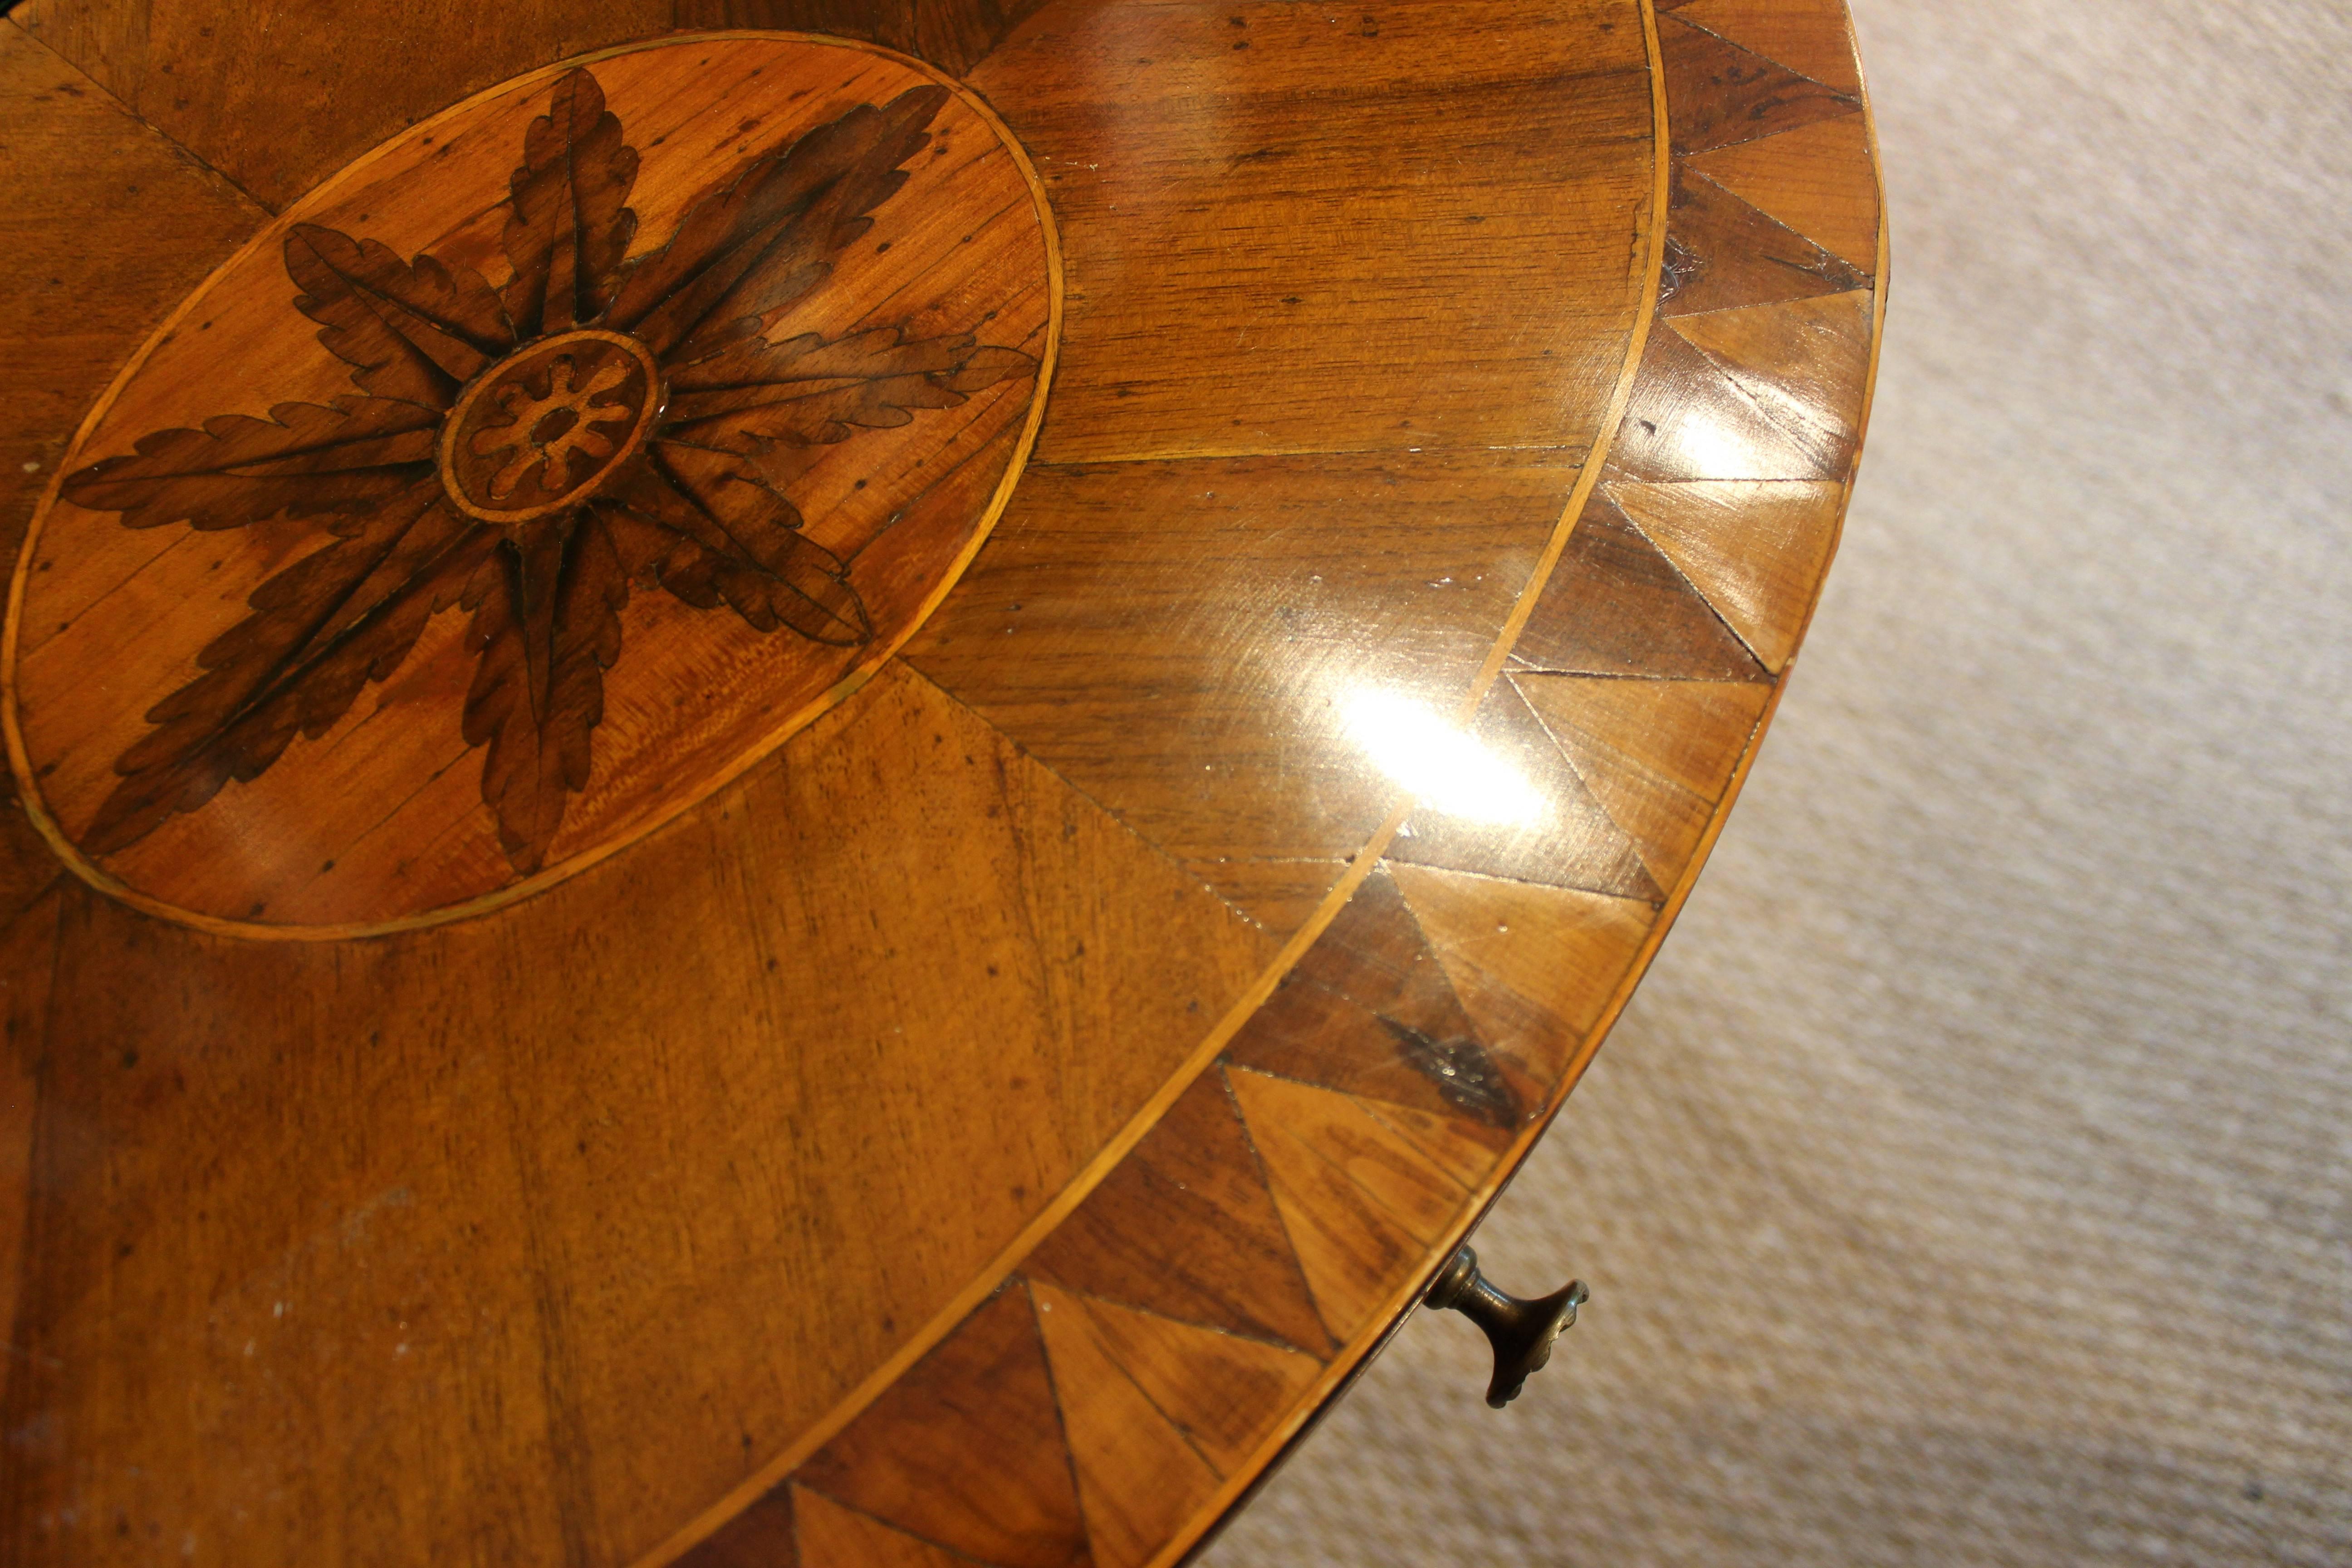 Beautifully inlaid walnut demilune table with drawer and original hardware.